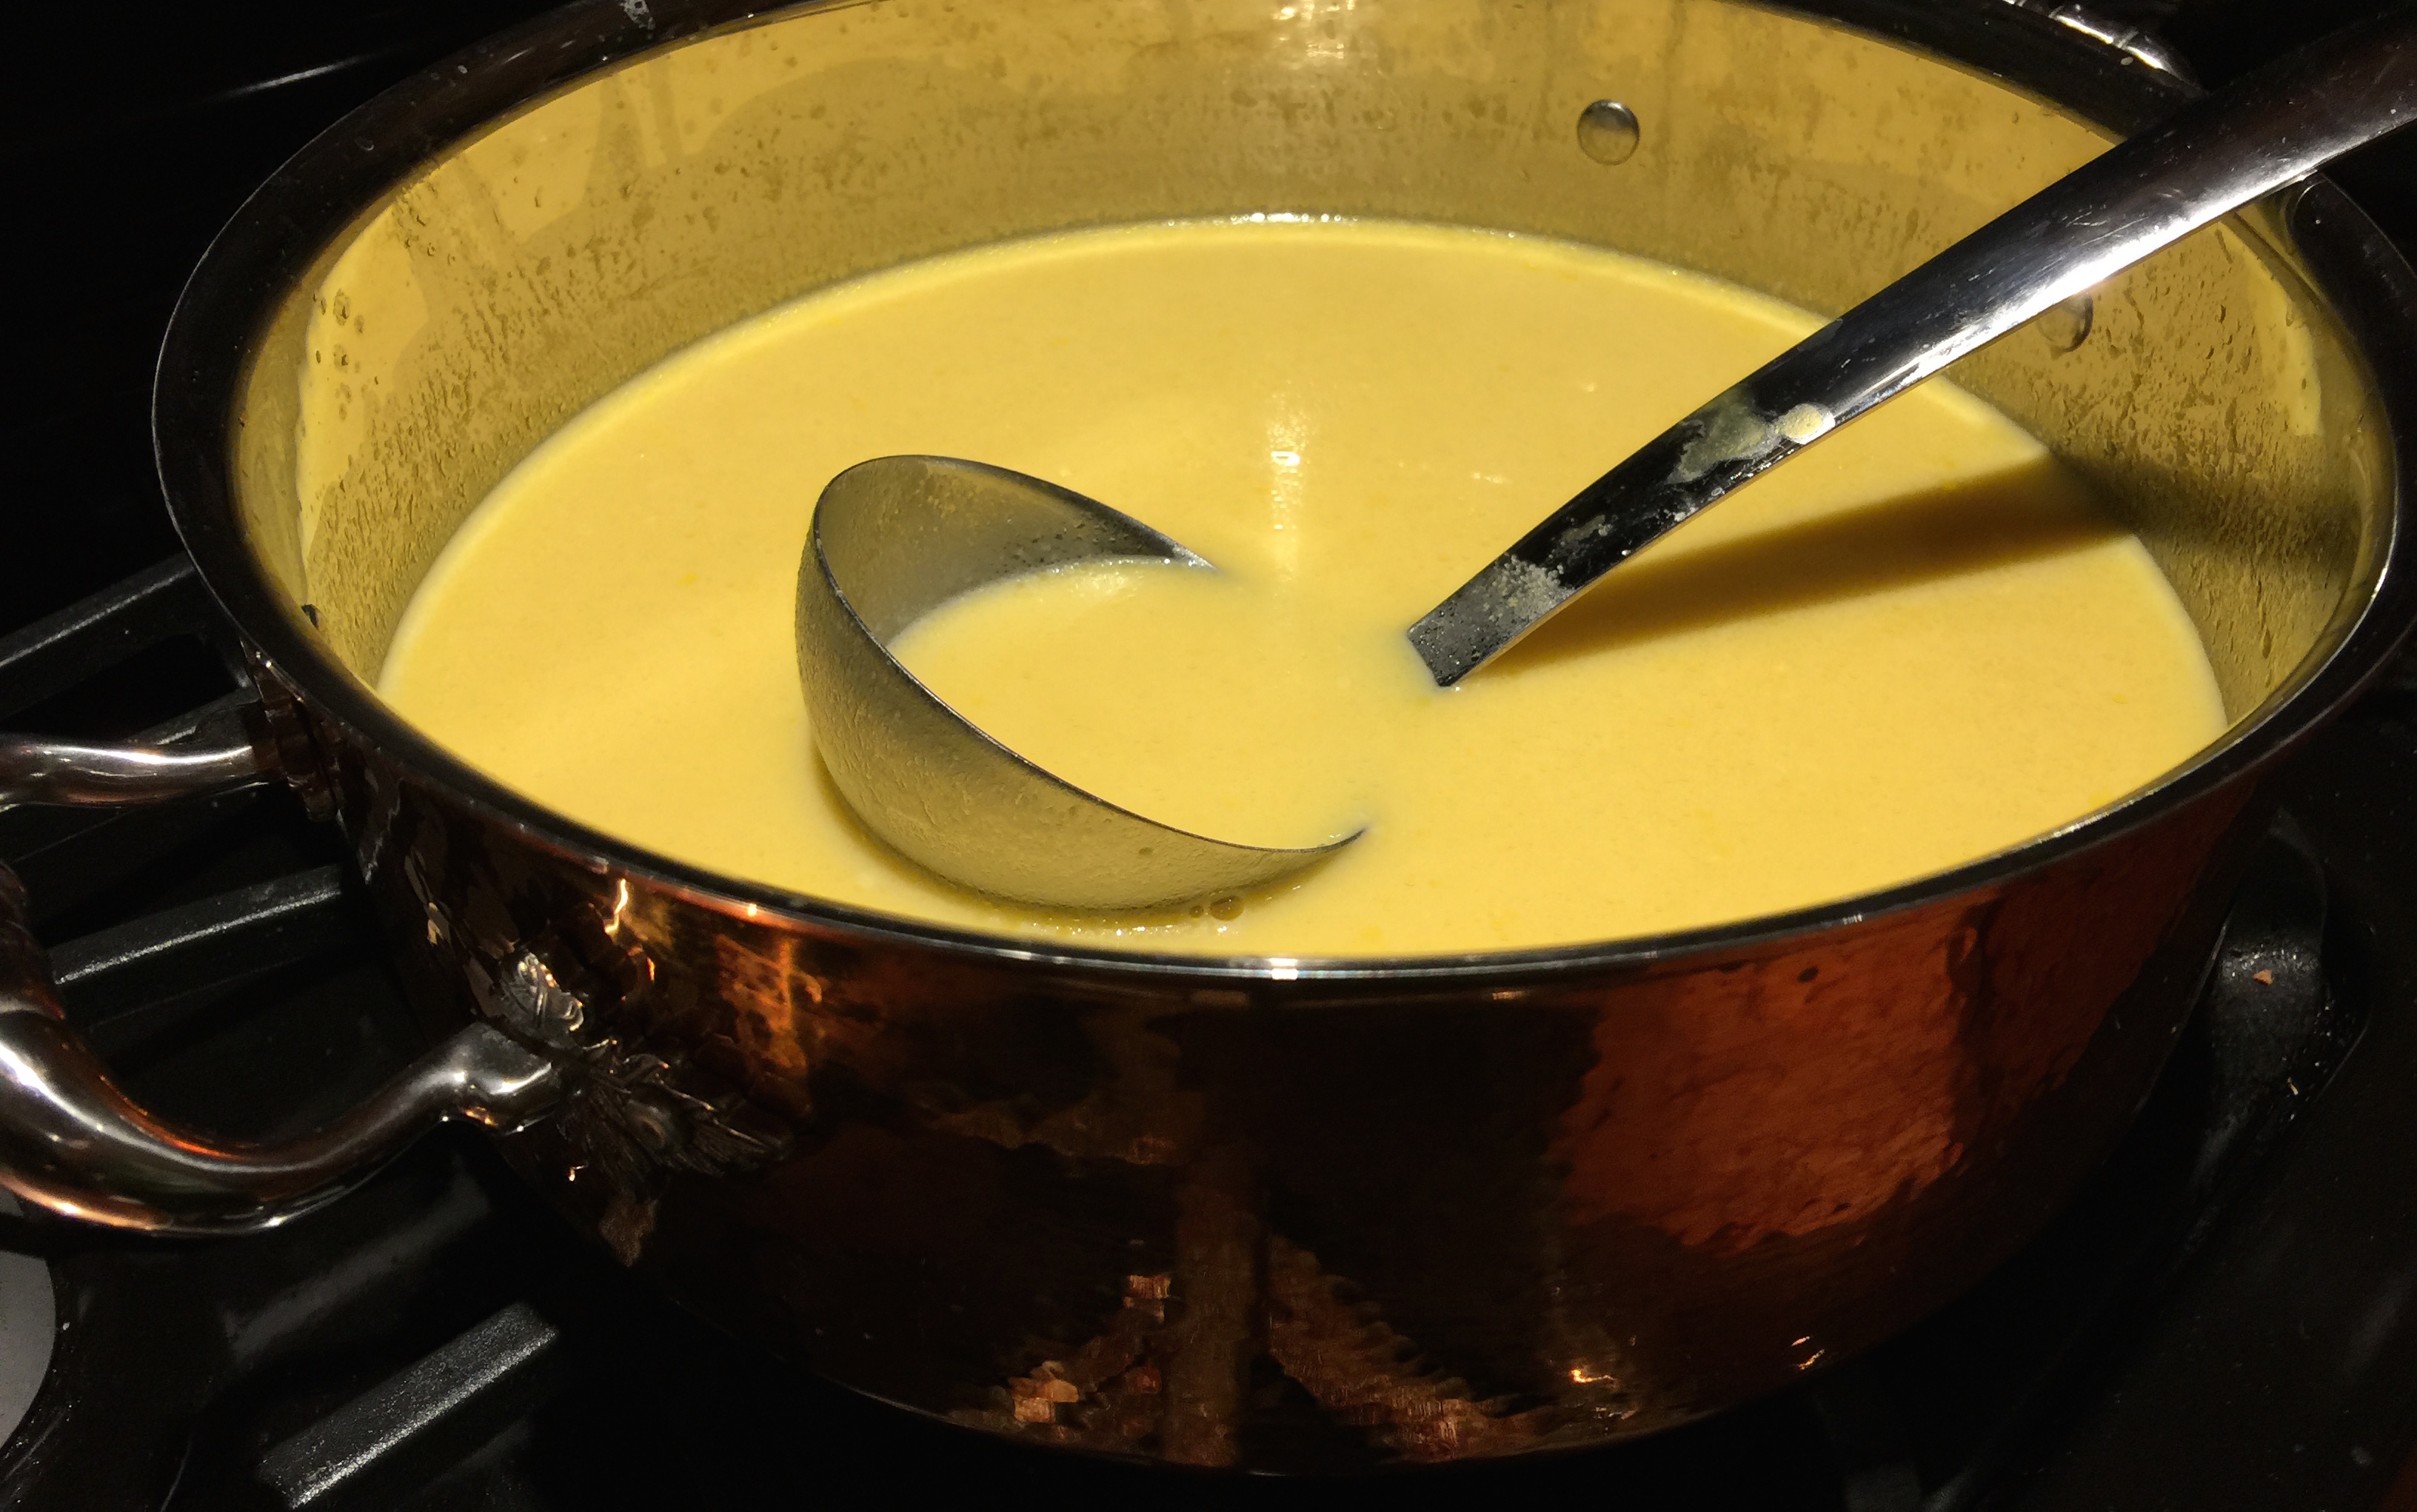 Bring the Finished Butternut Squash Soup Up to a Simmer on Medium High Heat